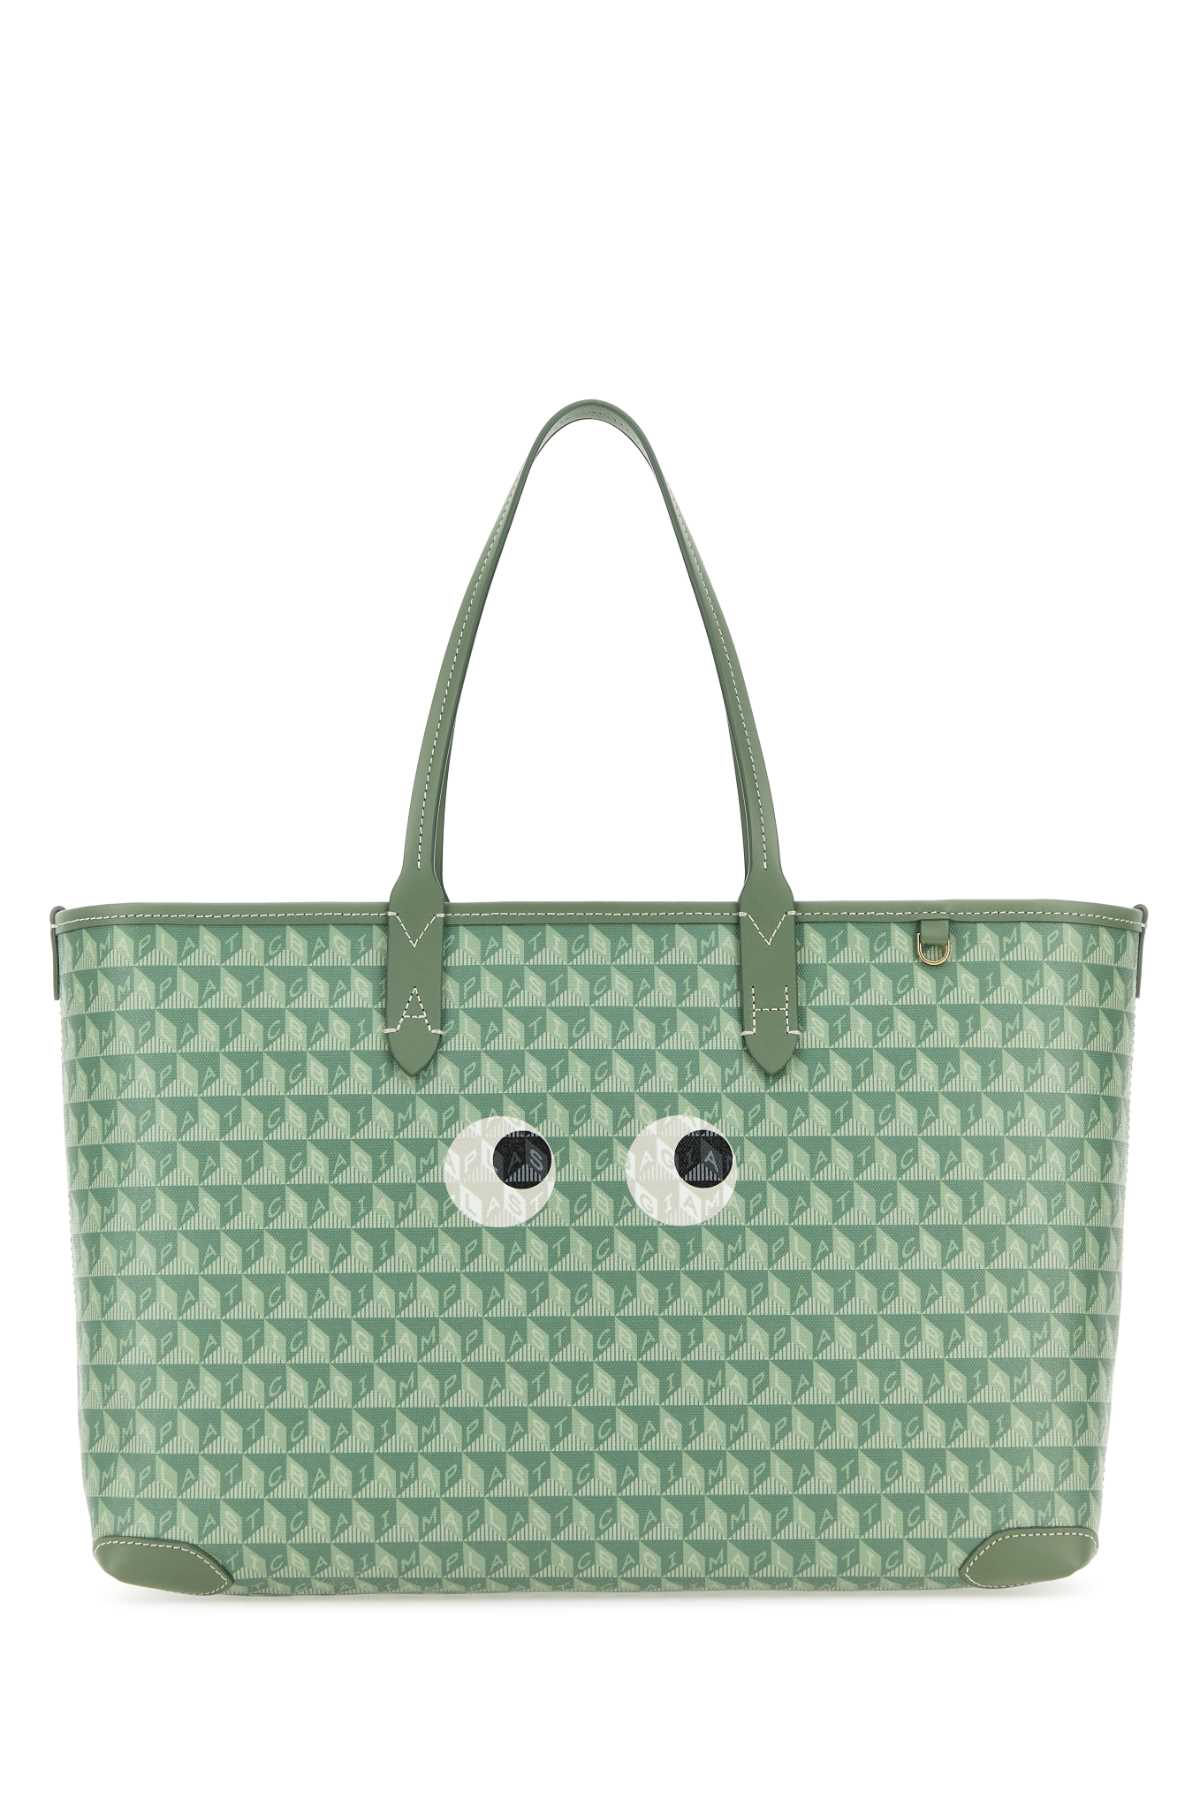 Anya Hindmarch Printed Canvas Small I Am A Plastic Bag Shopping Bag In Moss